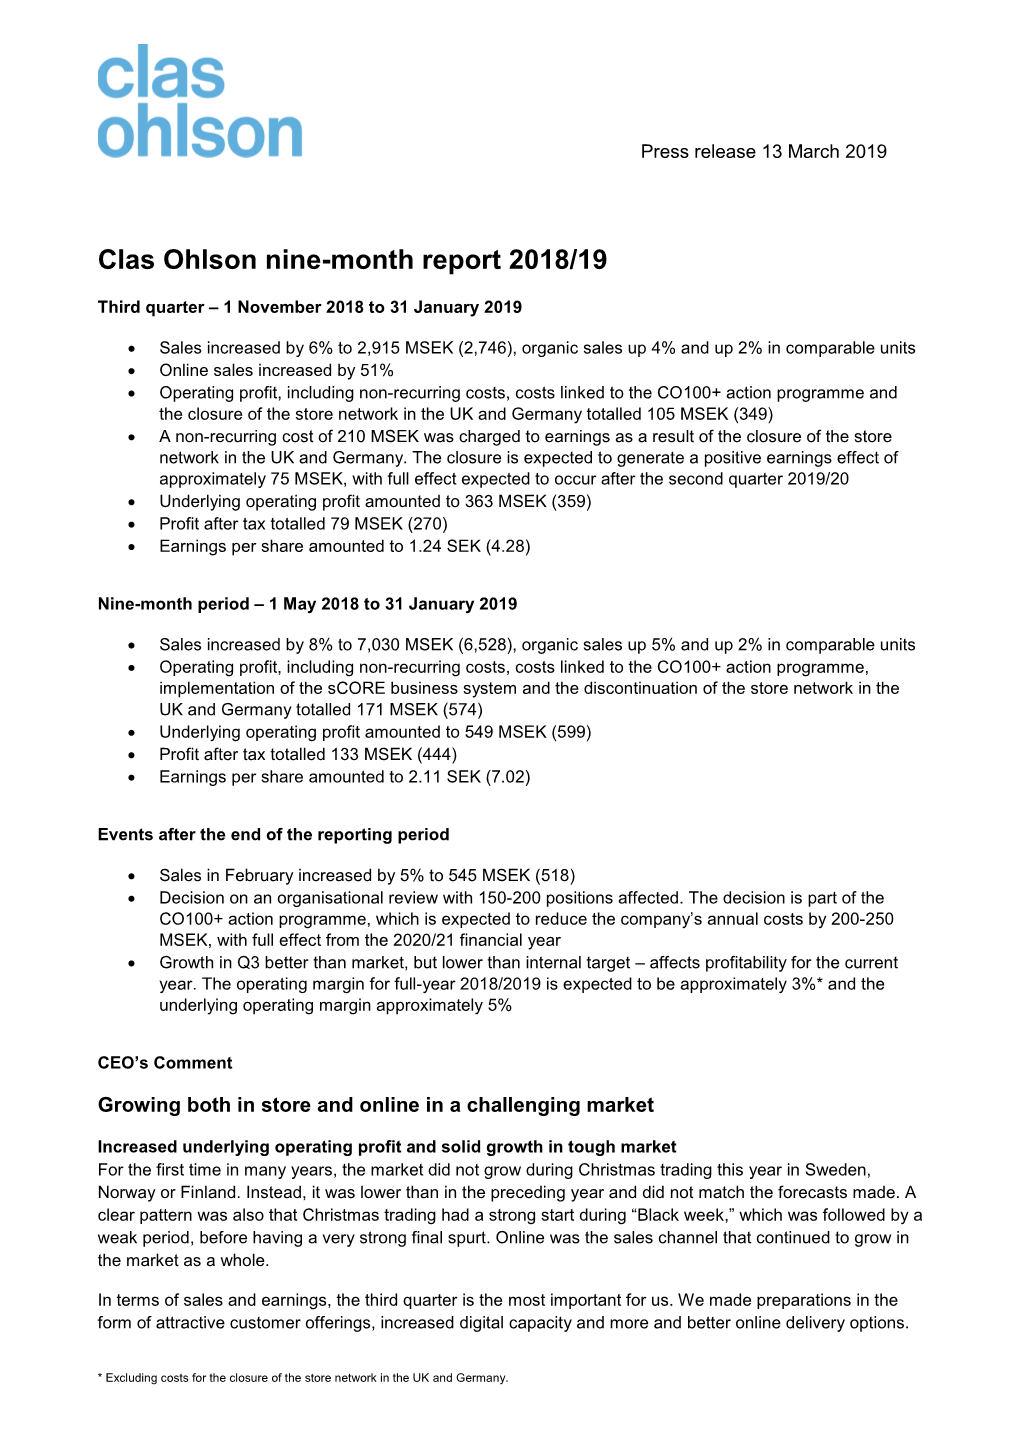 Press Release Clas Ohlson Nine Month Report 2018-19